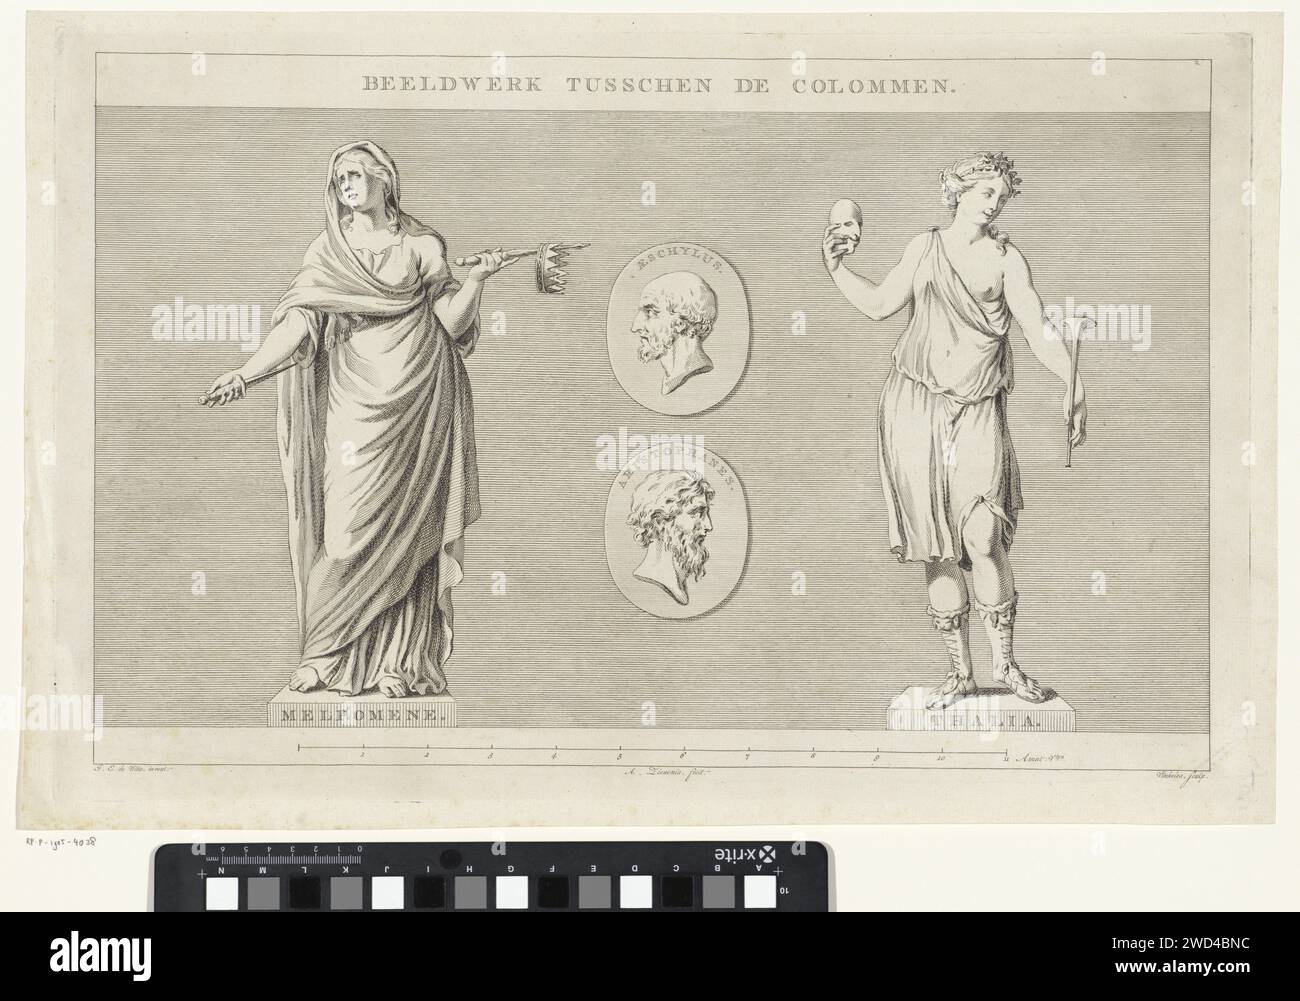 Images of the Schouwburg van Amsterdam, Reinier Vinkeles (I), After Jacob Eduard de Witte, 1774 print The muse of the Melpomene tragedy with dagger, skeptic and crown and the muse of the comedy, Thalia with mask and trumpet. Between them in two medallions with the images of the tragedy poet Aeschylus and the comedian Aristophanes. Amsterdam paper etching / engraving theatre (building). piece of sculpture, reproduction of a piece of sculpture. Thalia (one of the Muses); 'Talia' (Ripa). Melpomene (one of the Muses); 'Melpomene' (Ripa) Schouwburg Leidseplein (1774-1890). Amsterdam Stock Photo